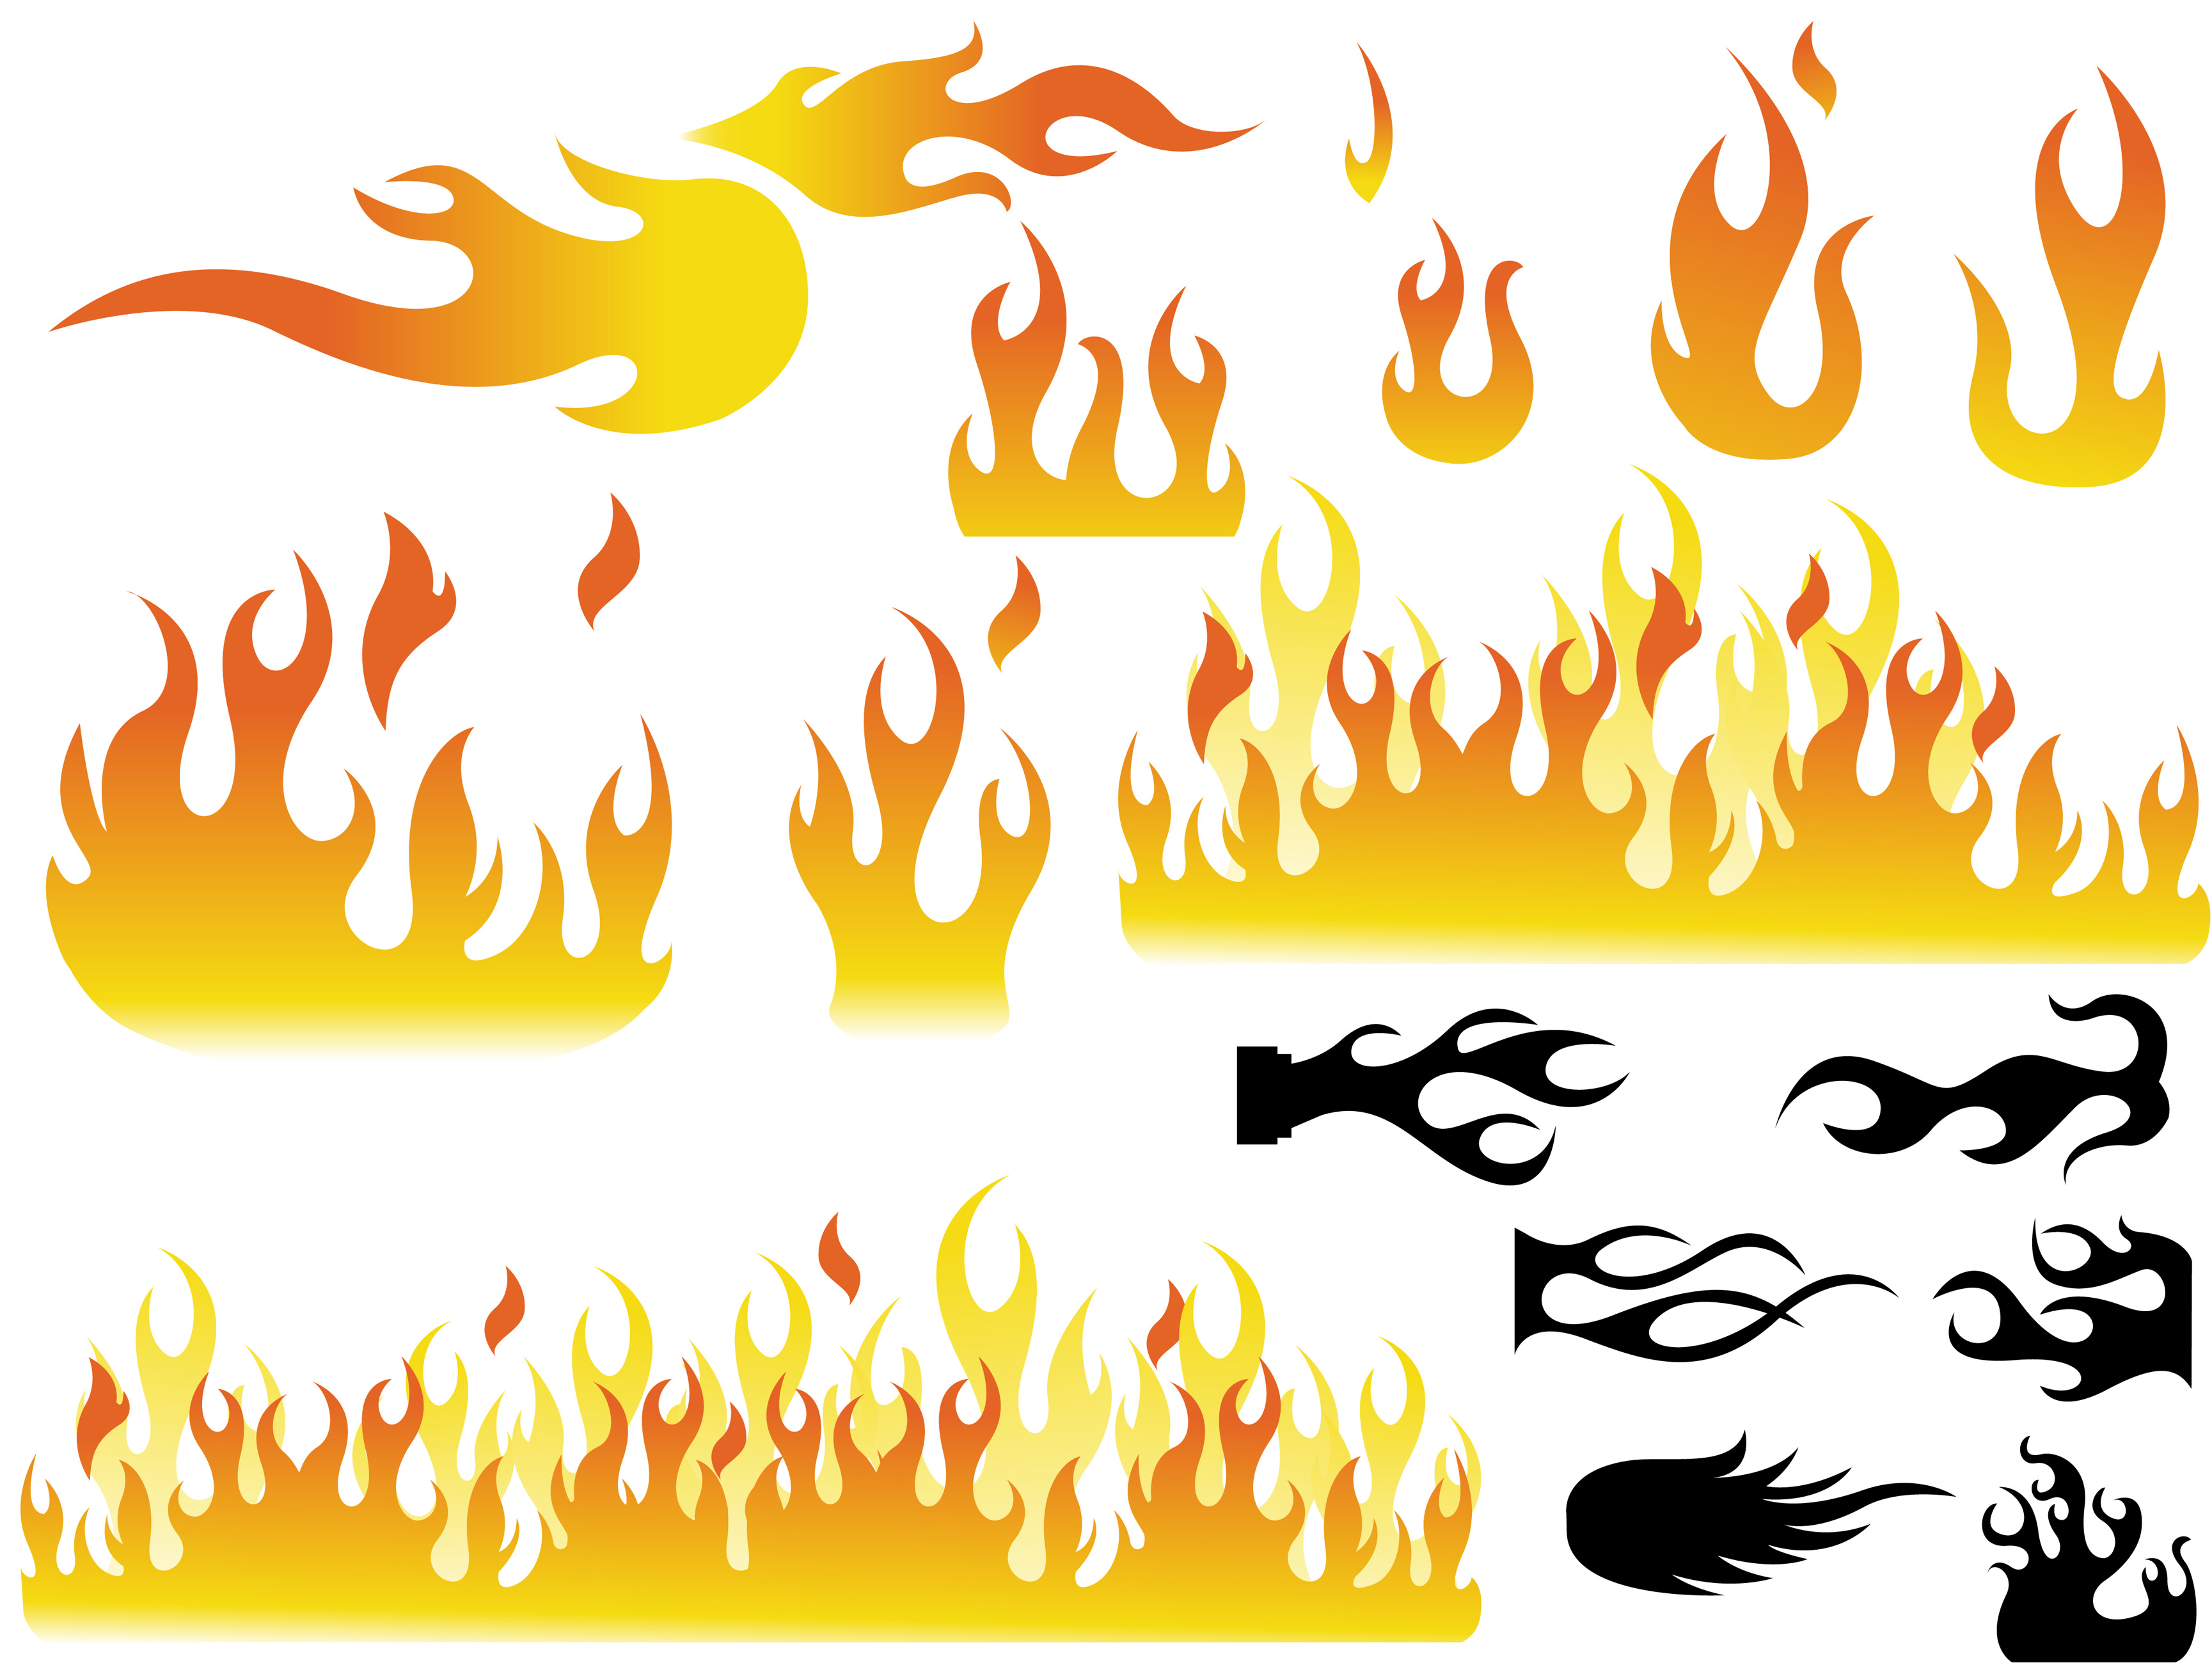 How To Draw Cartoon Fire Flames | Clipart Panda - Free Clipart Images